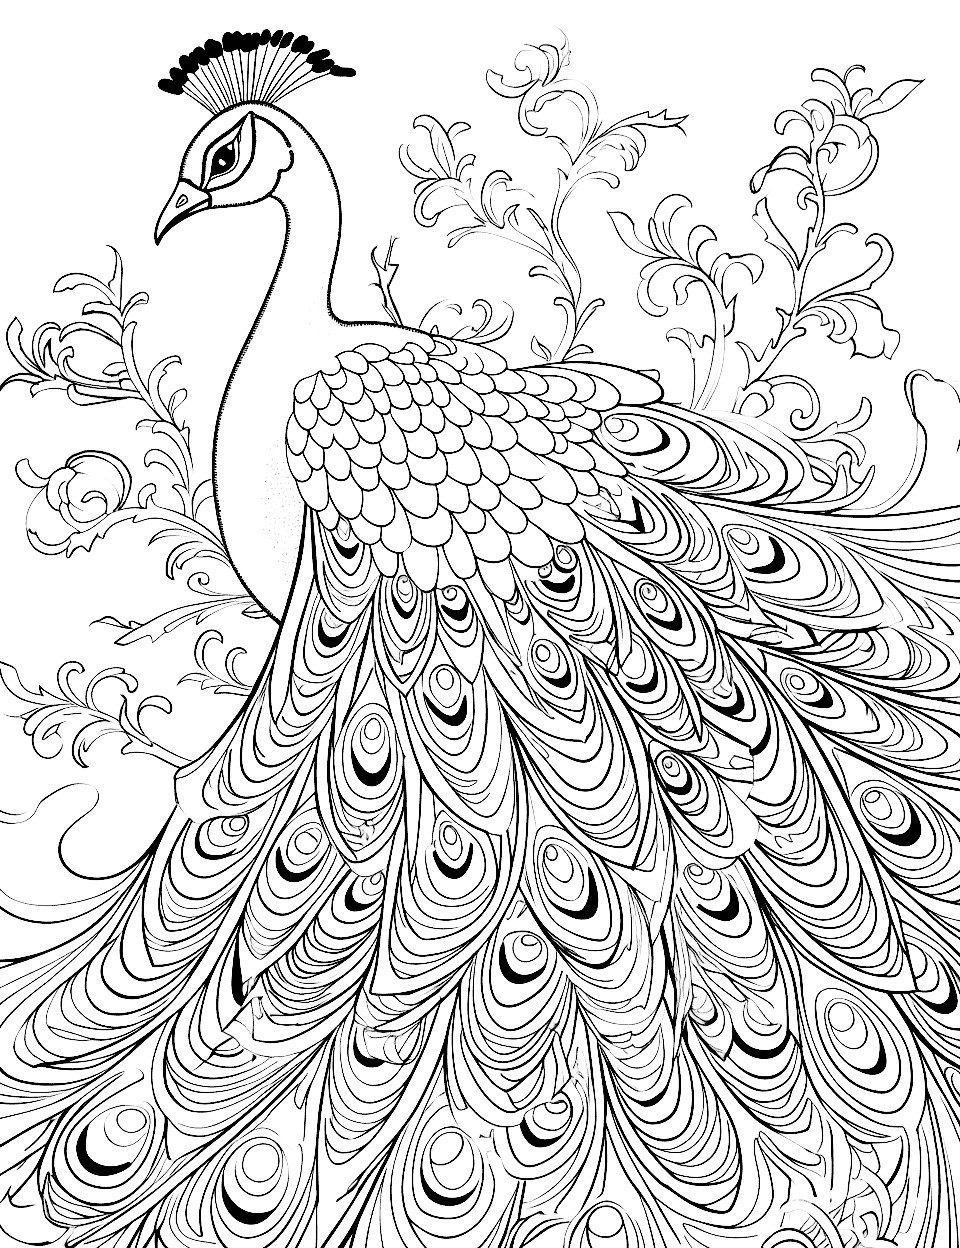 Peacock's Feathered Splendor Adult Coloring Page - A peacock with its vibrant tail feathers spread out.